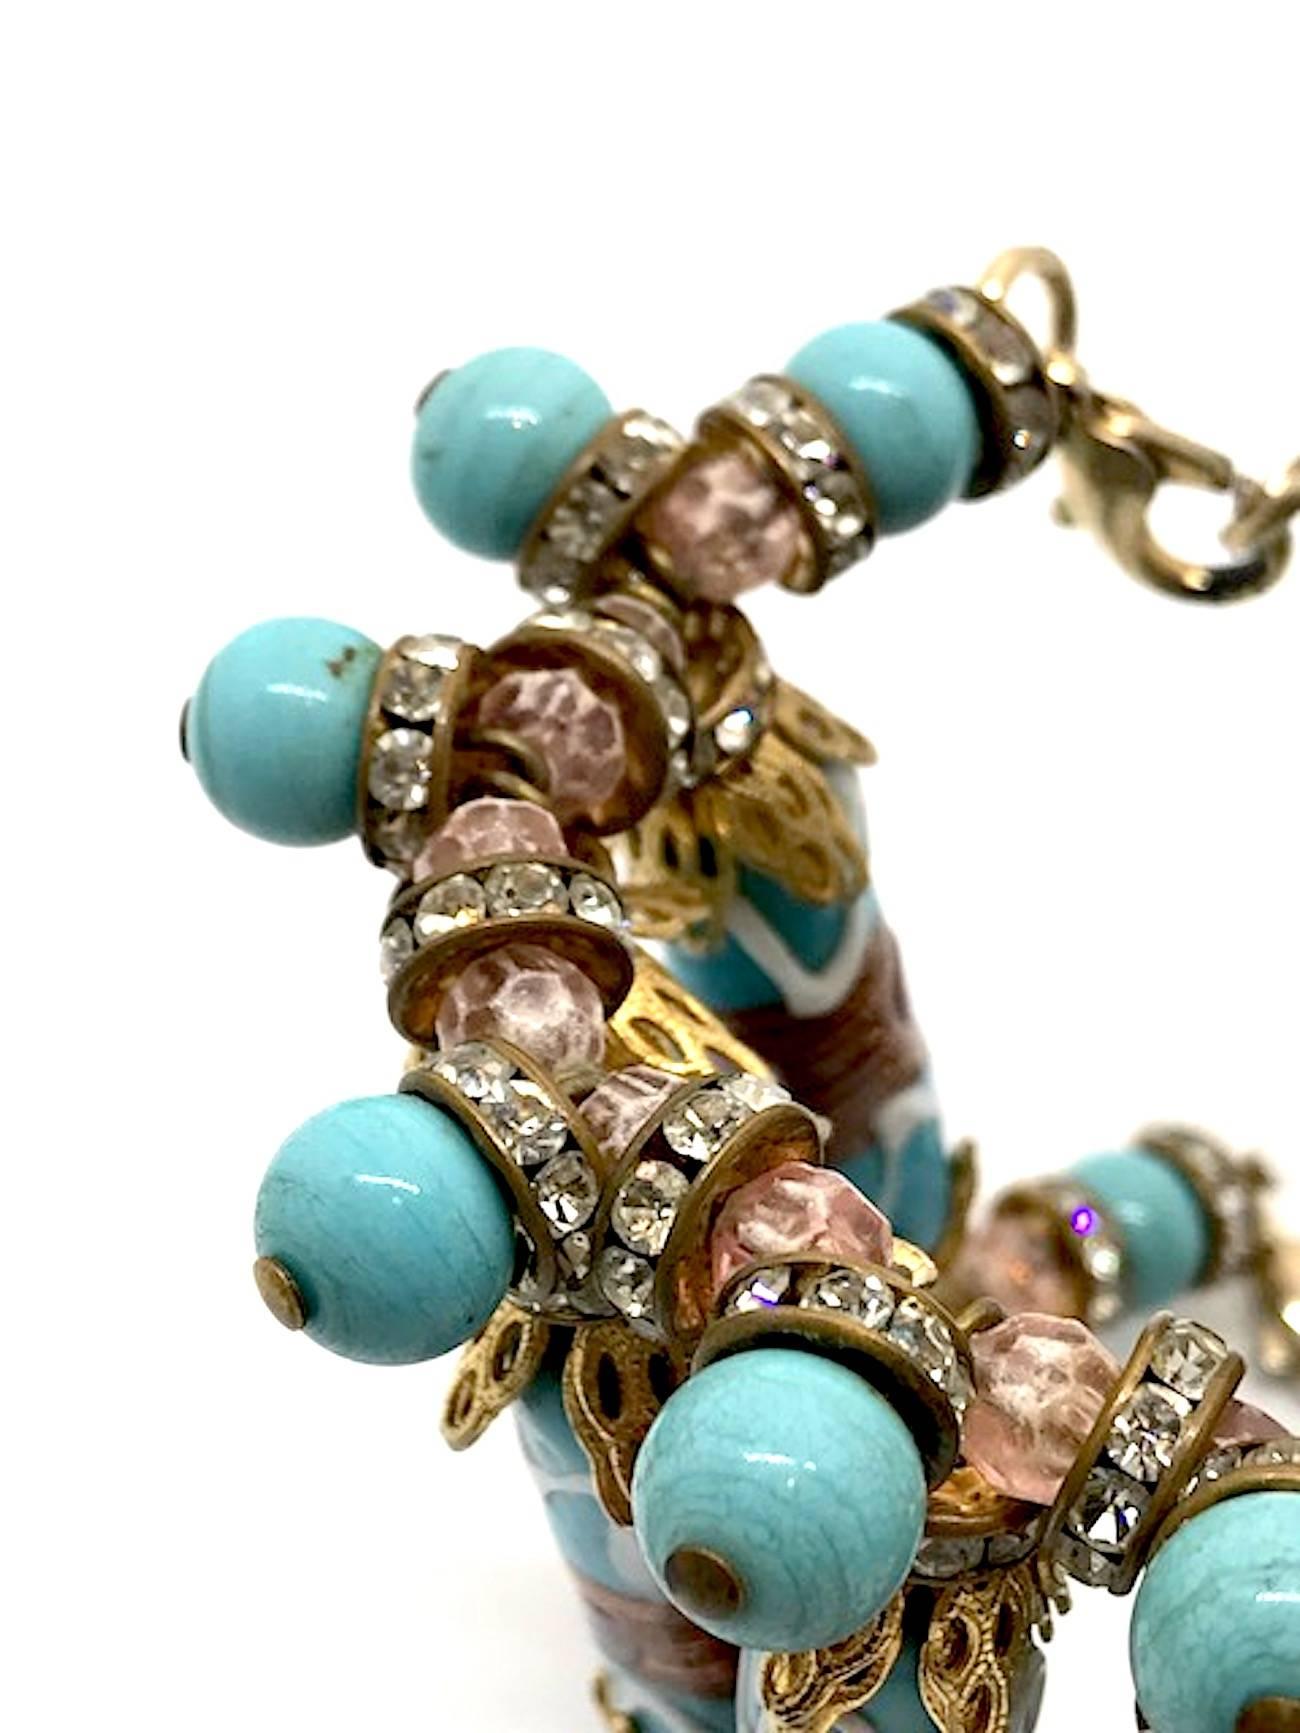 Women's Venetian glass bead cuff from actress Elsa Martinelli's personal collection